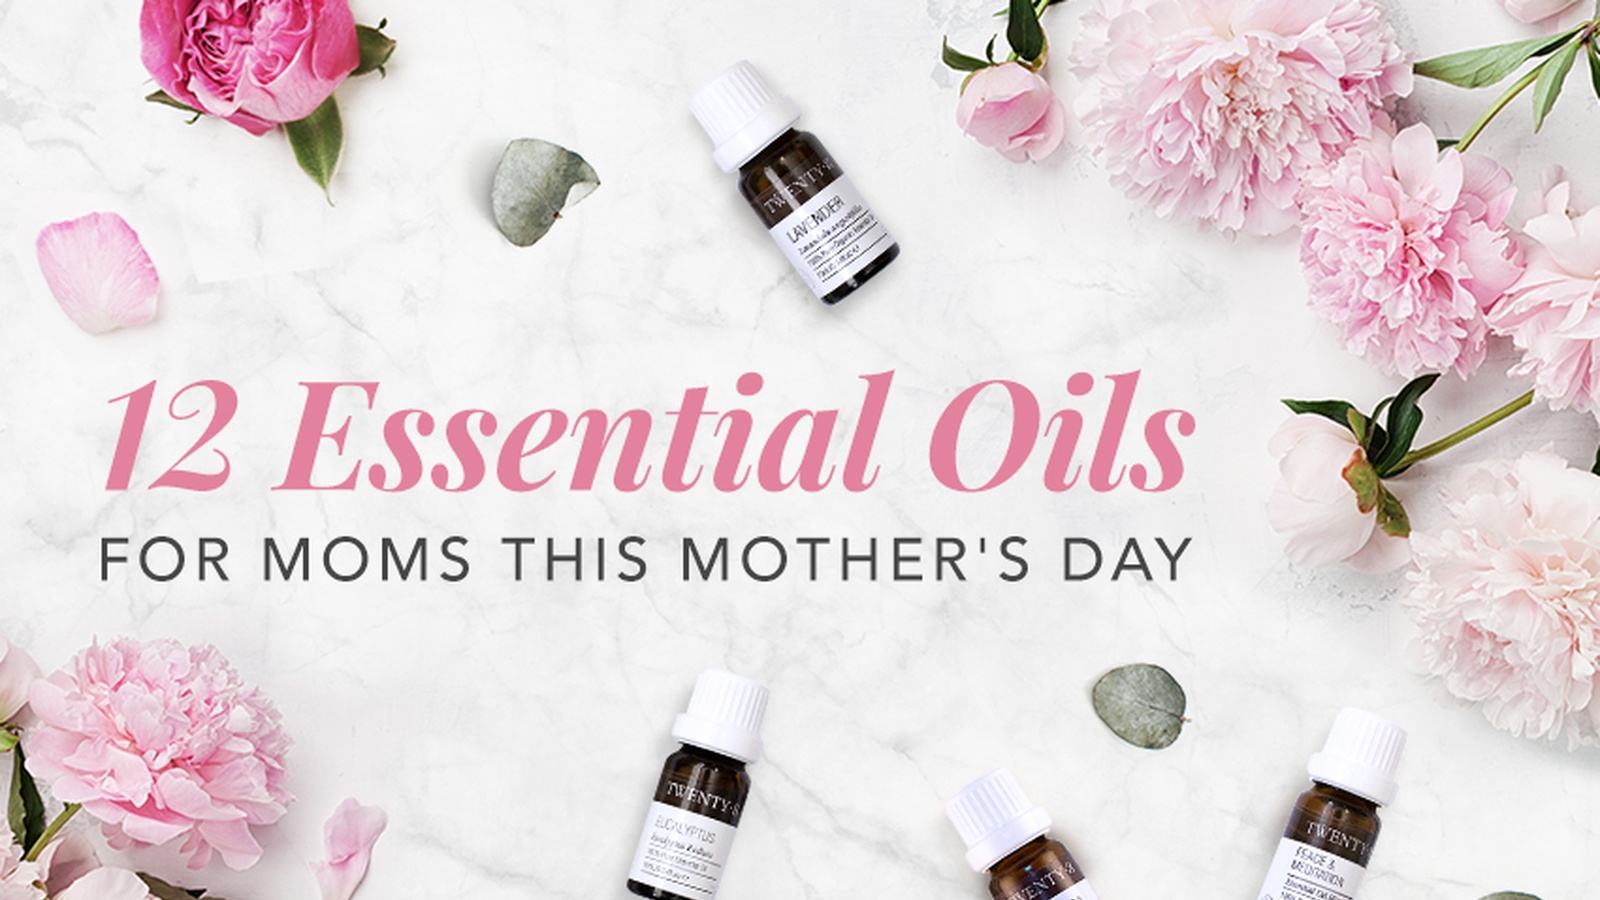 12 Essential Oils for Mother’s Day